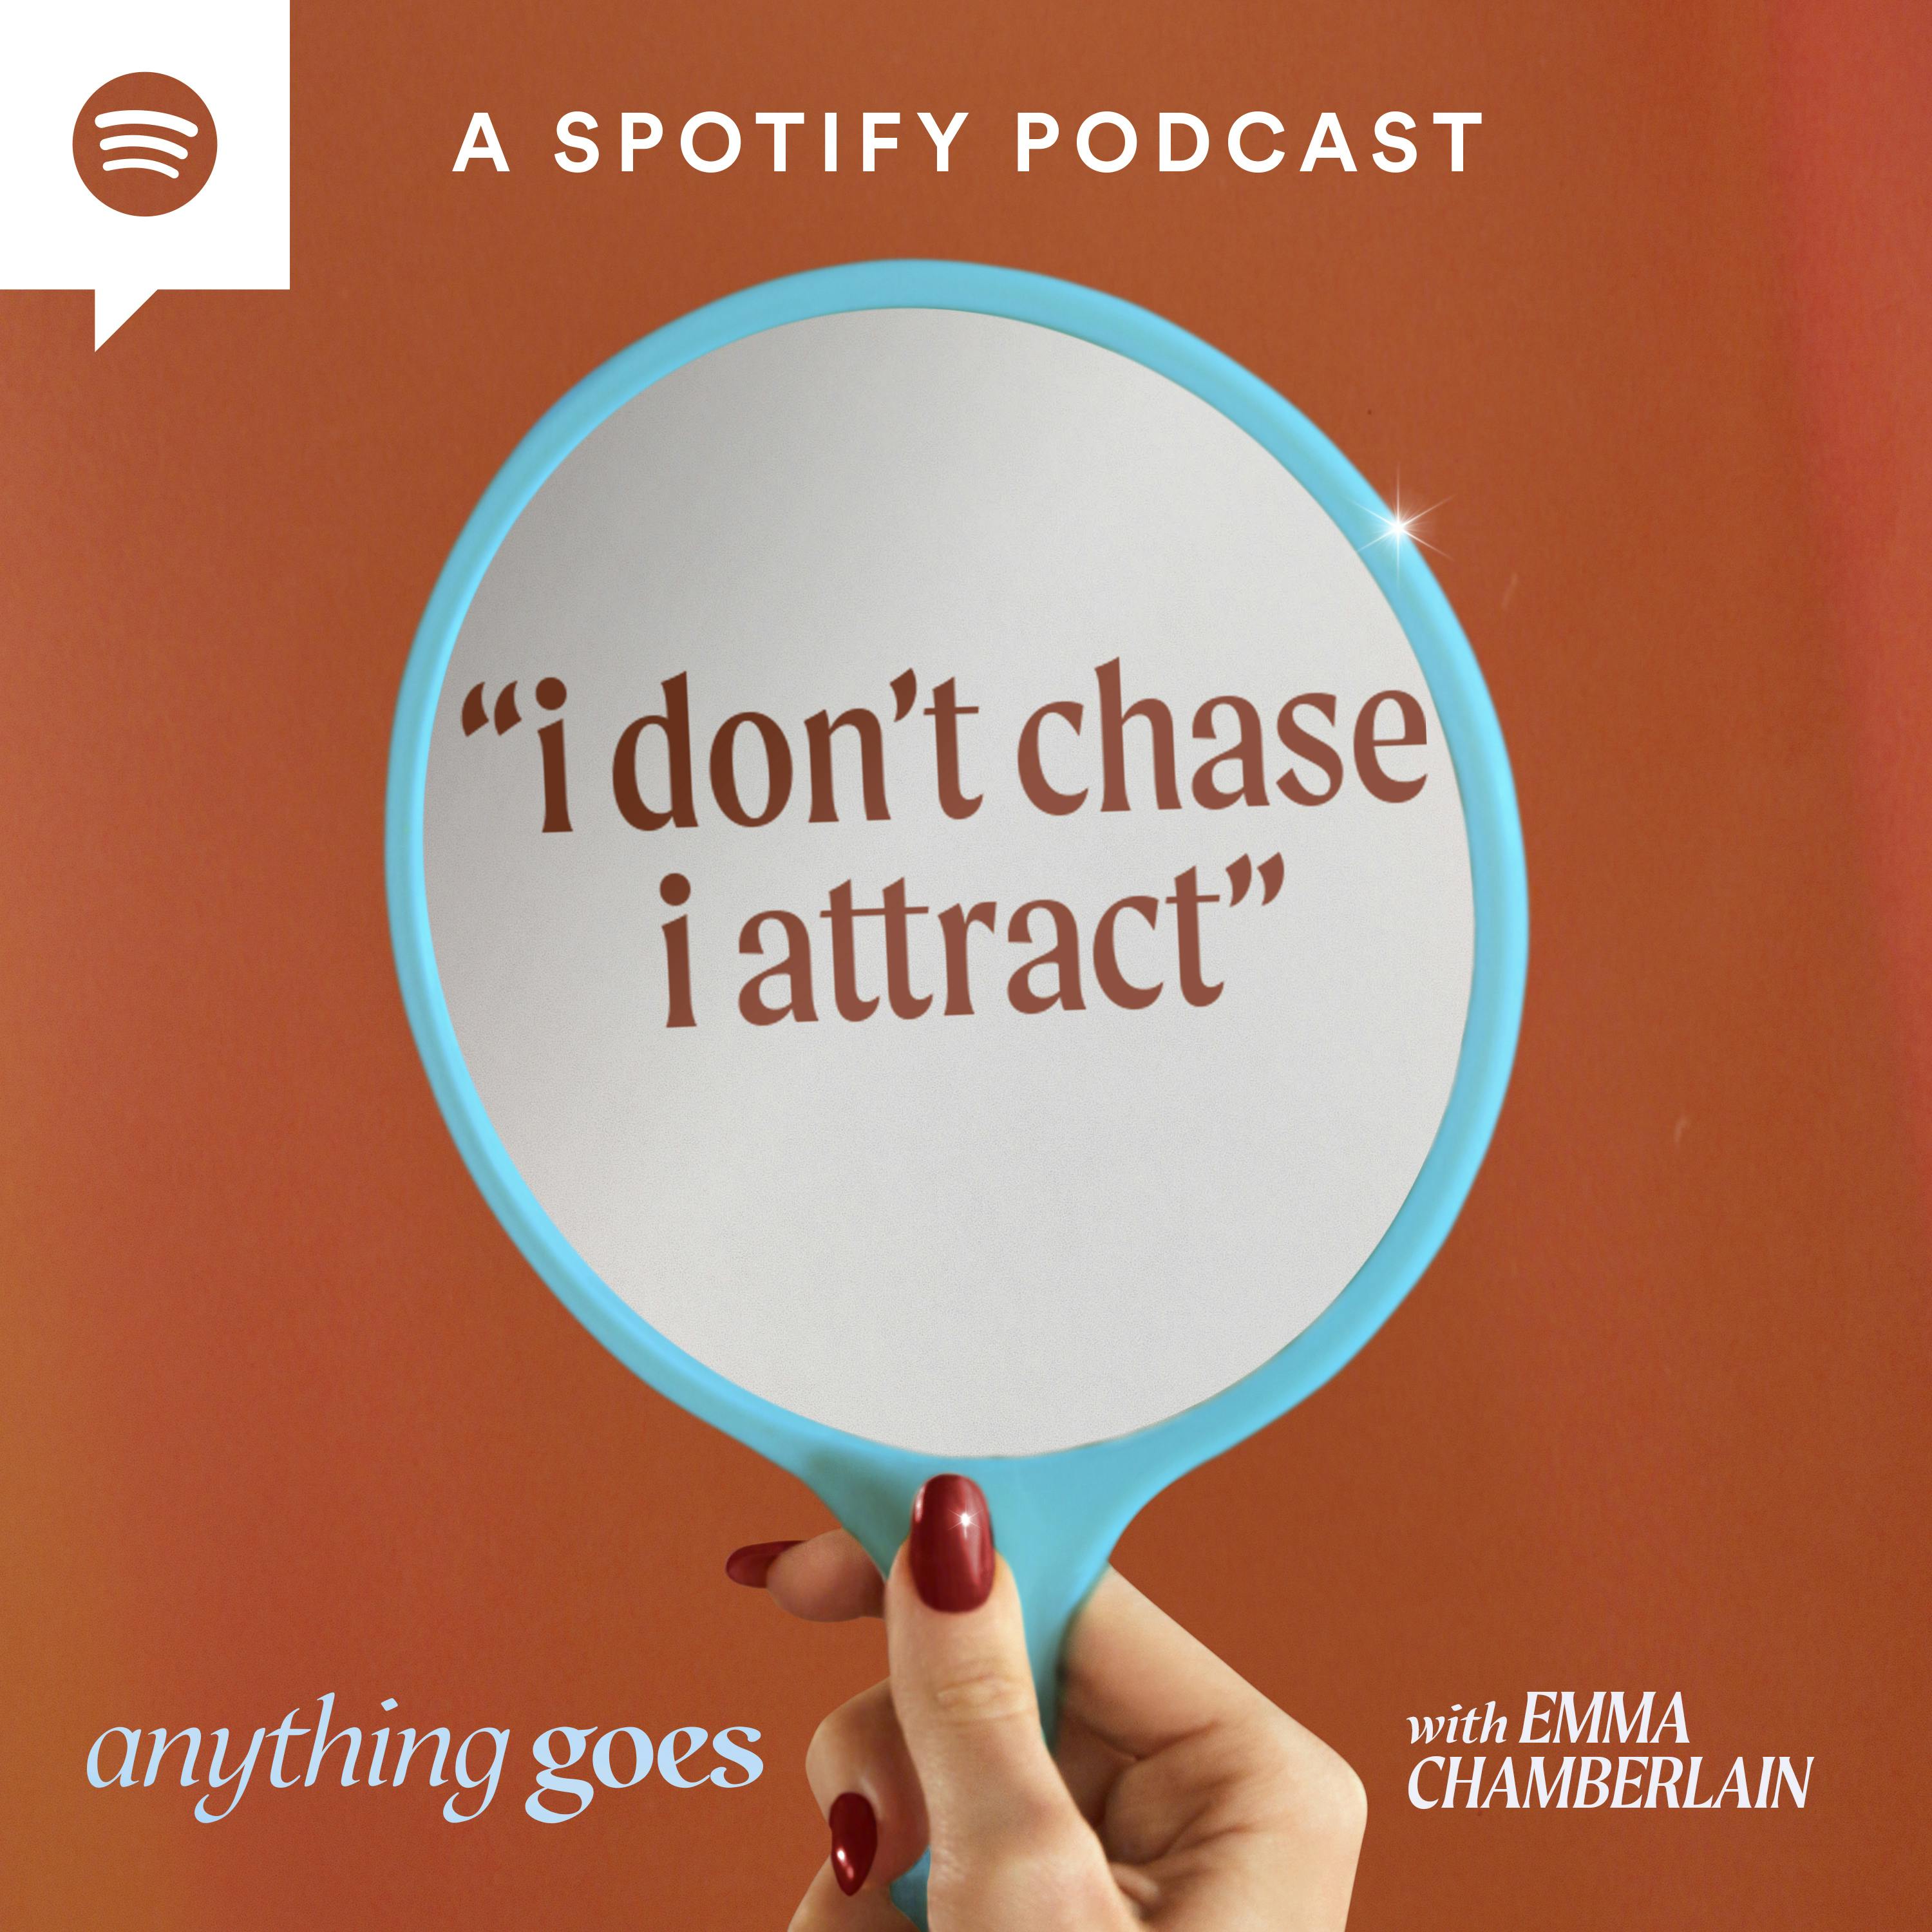 ”i don’t chase i attract” [video]